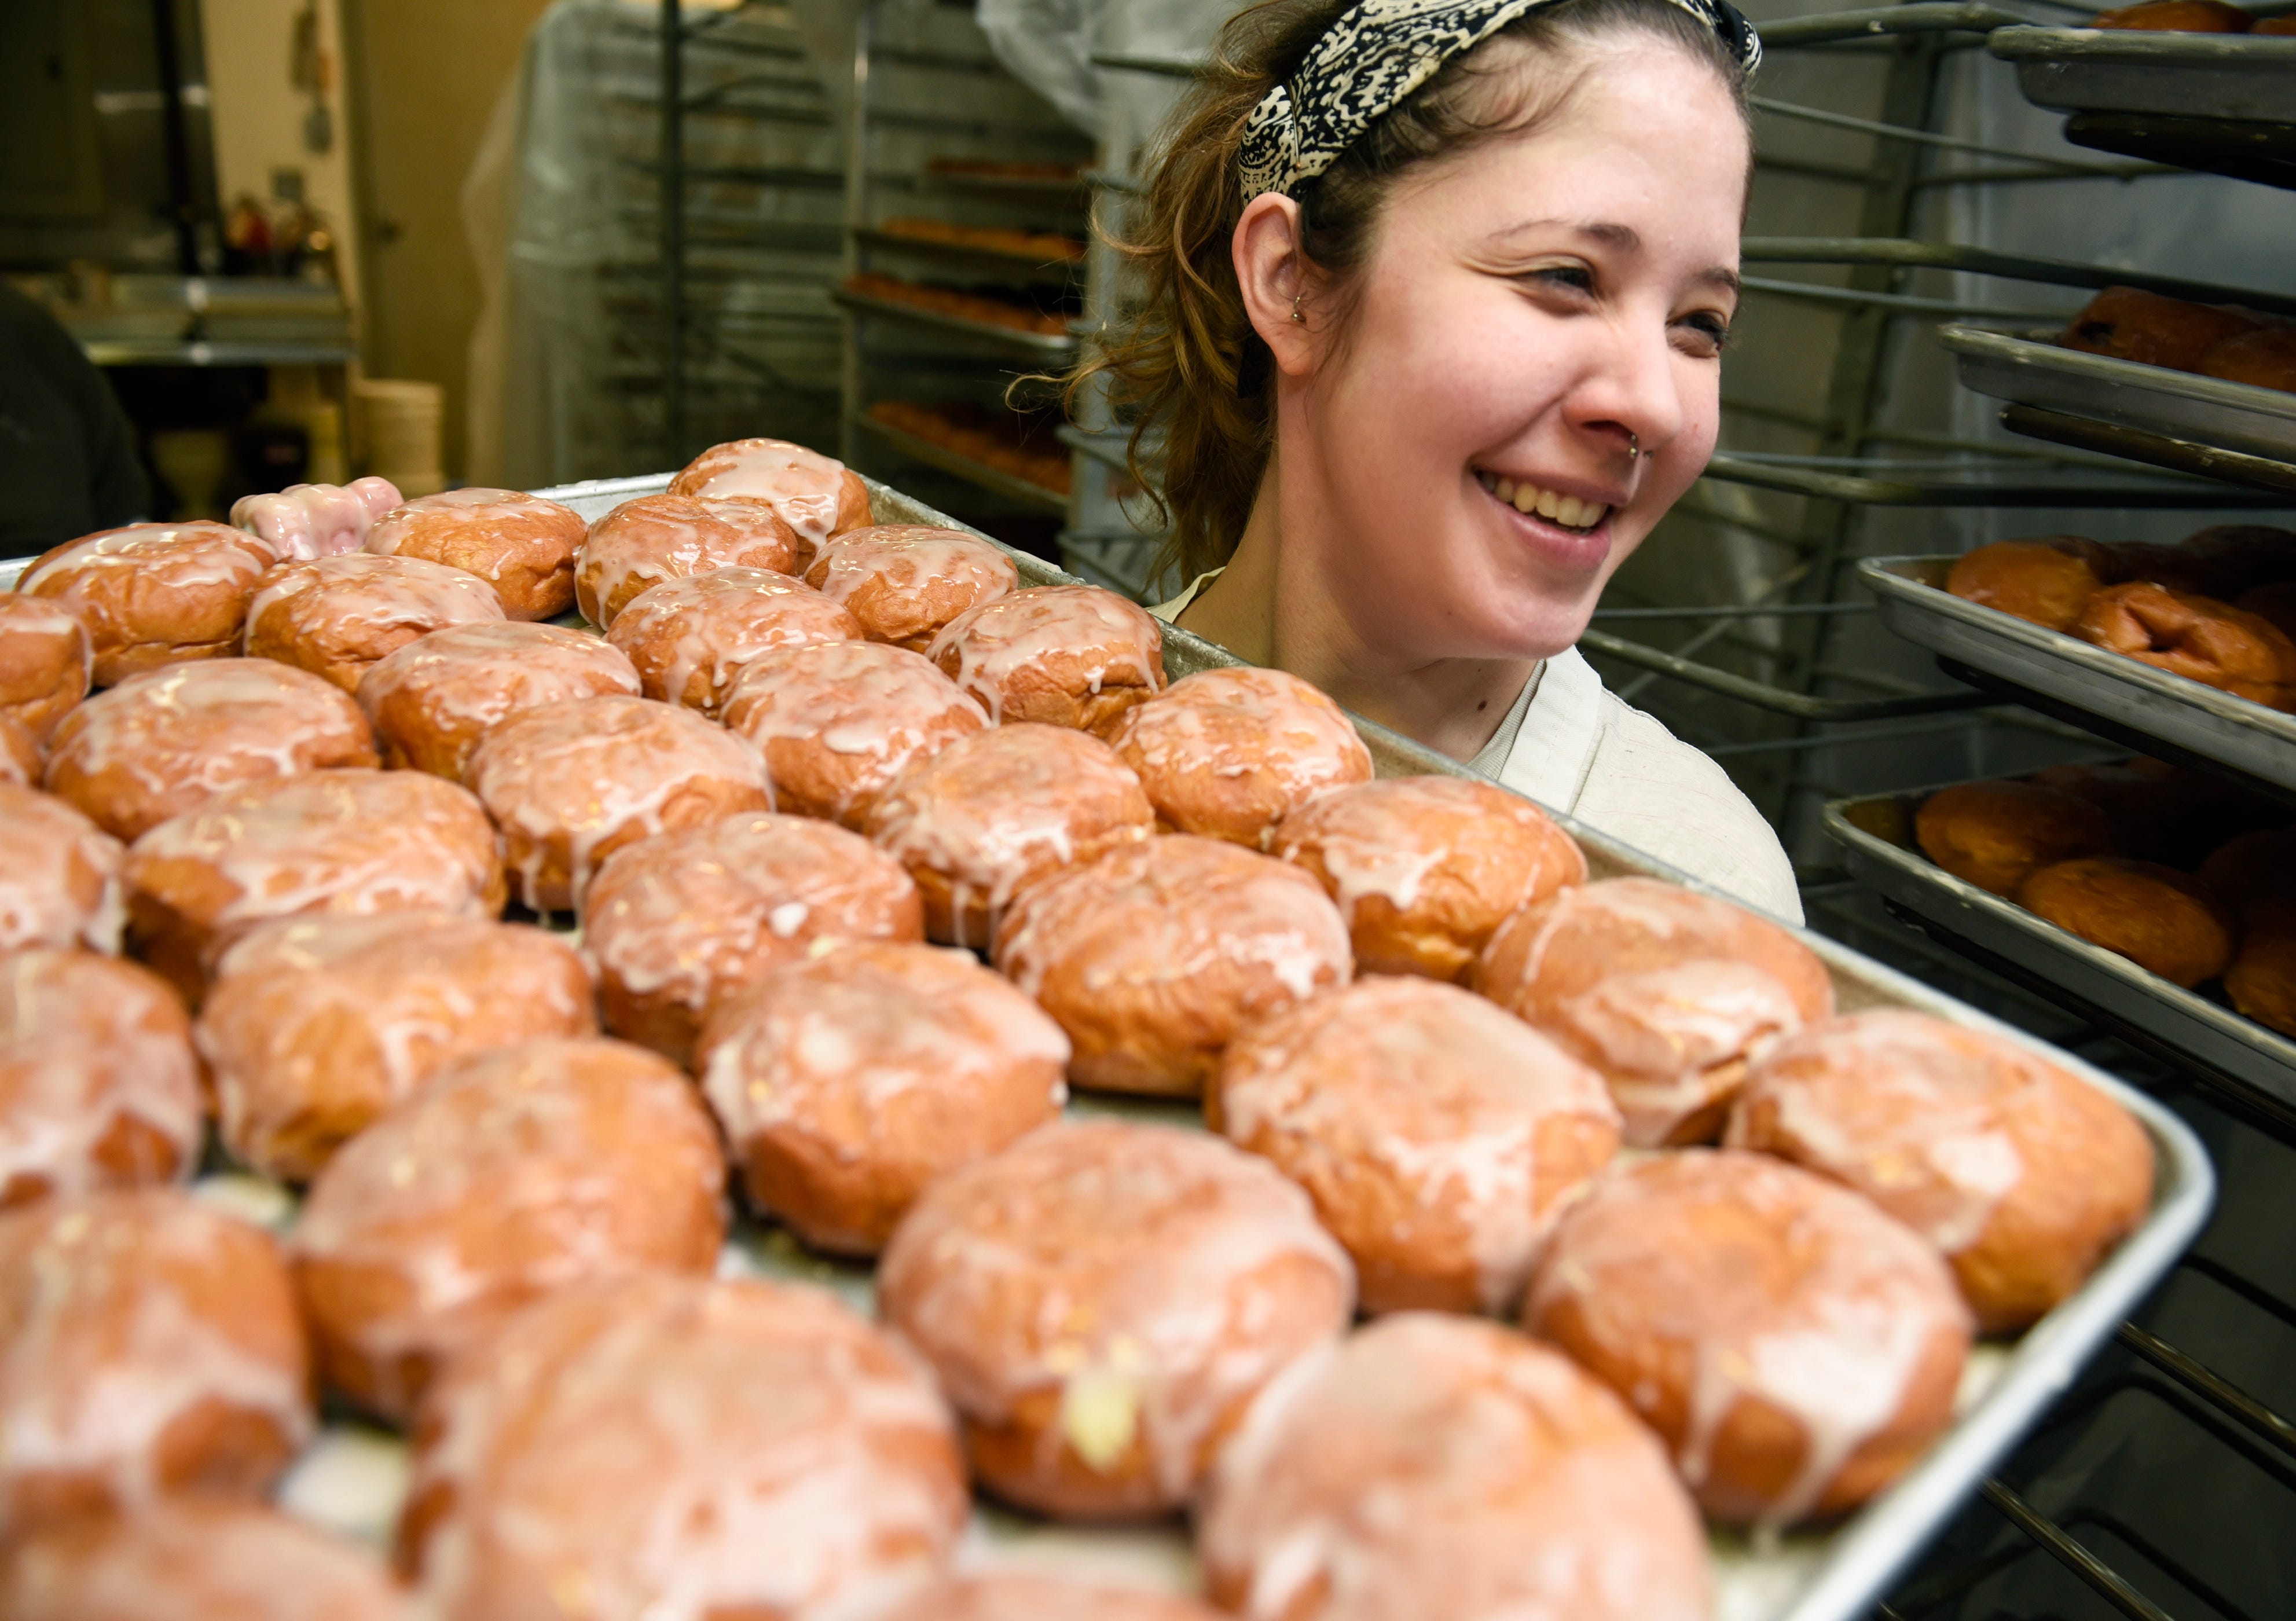 Petrisha Bakic, 28, carries a tray of paczki from the kitchen to the front counter for waiting customers at New Martha Washington Bakery.